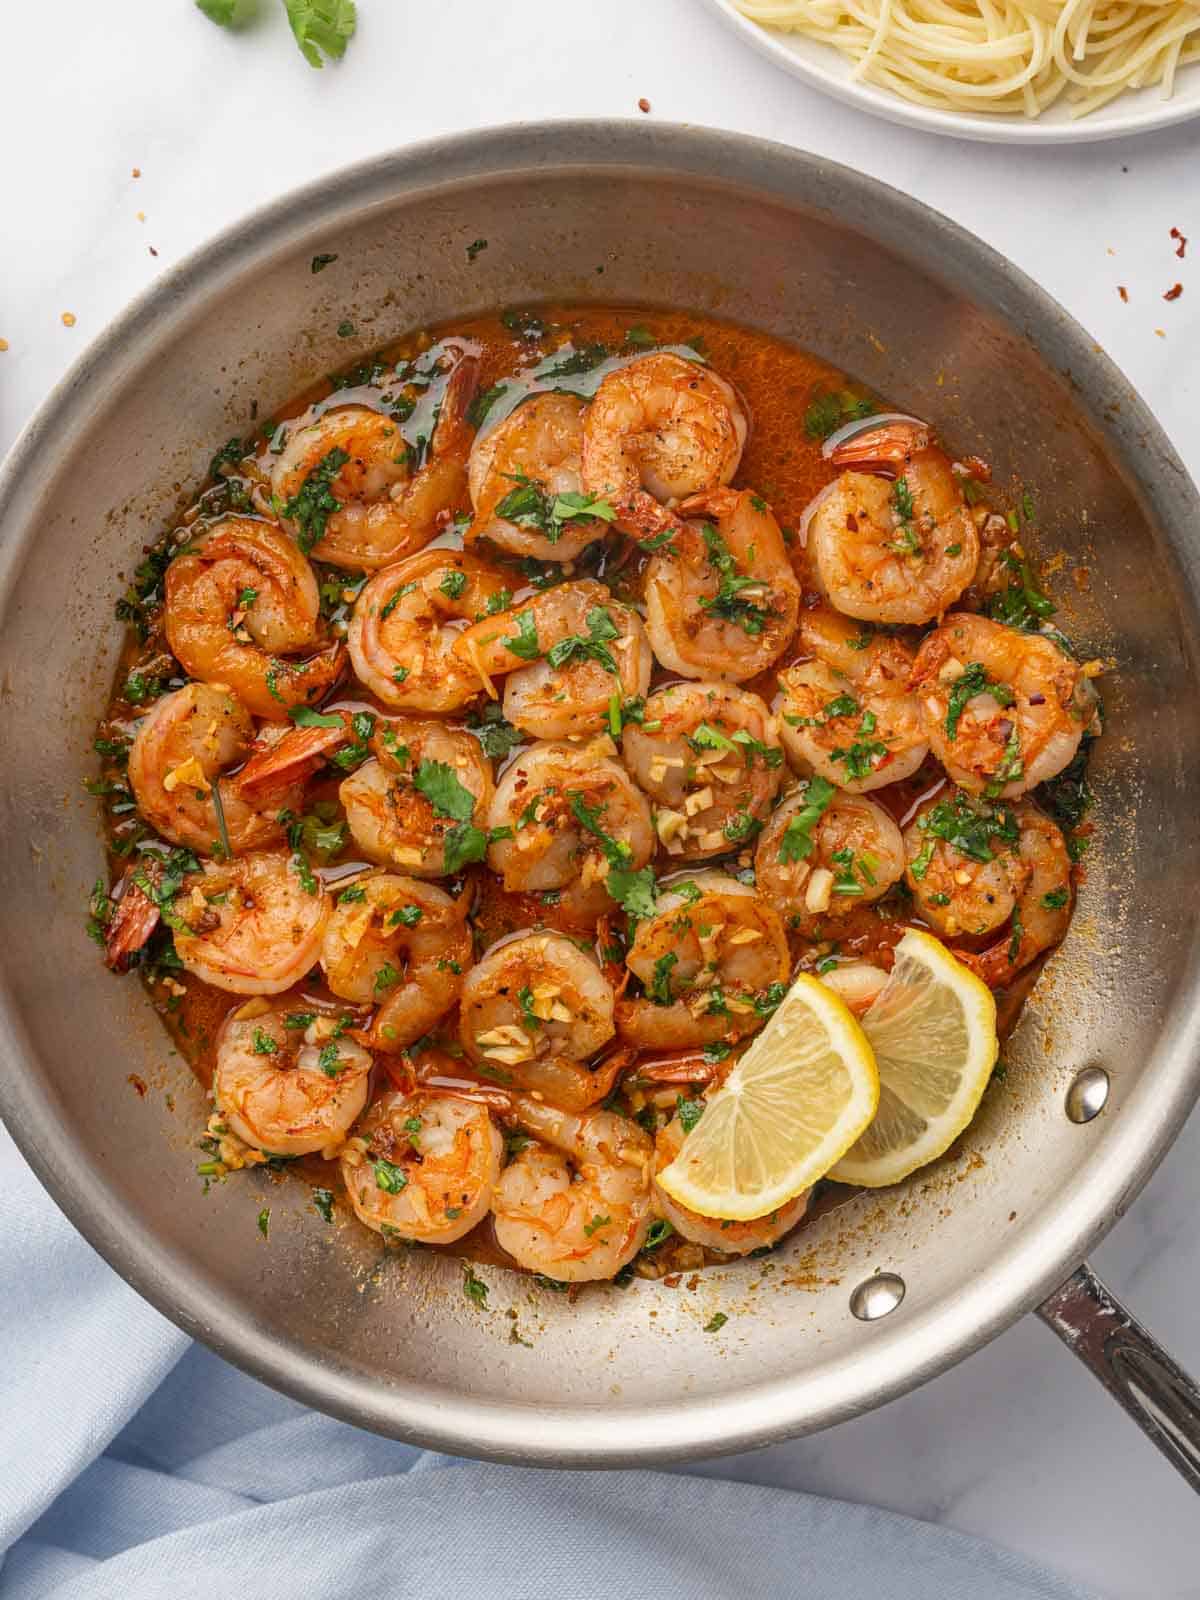 Shrimp sauteed in a spicy sauce in a skillet.